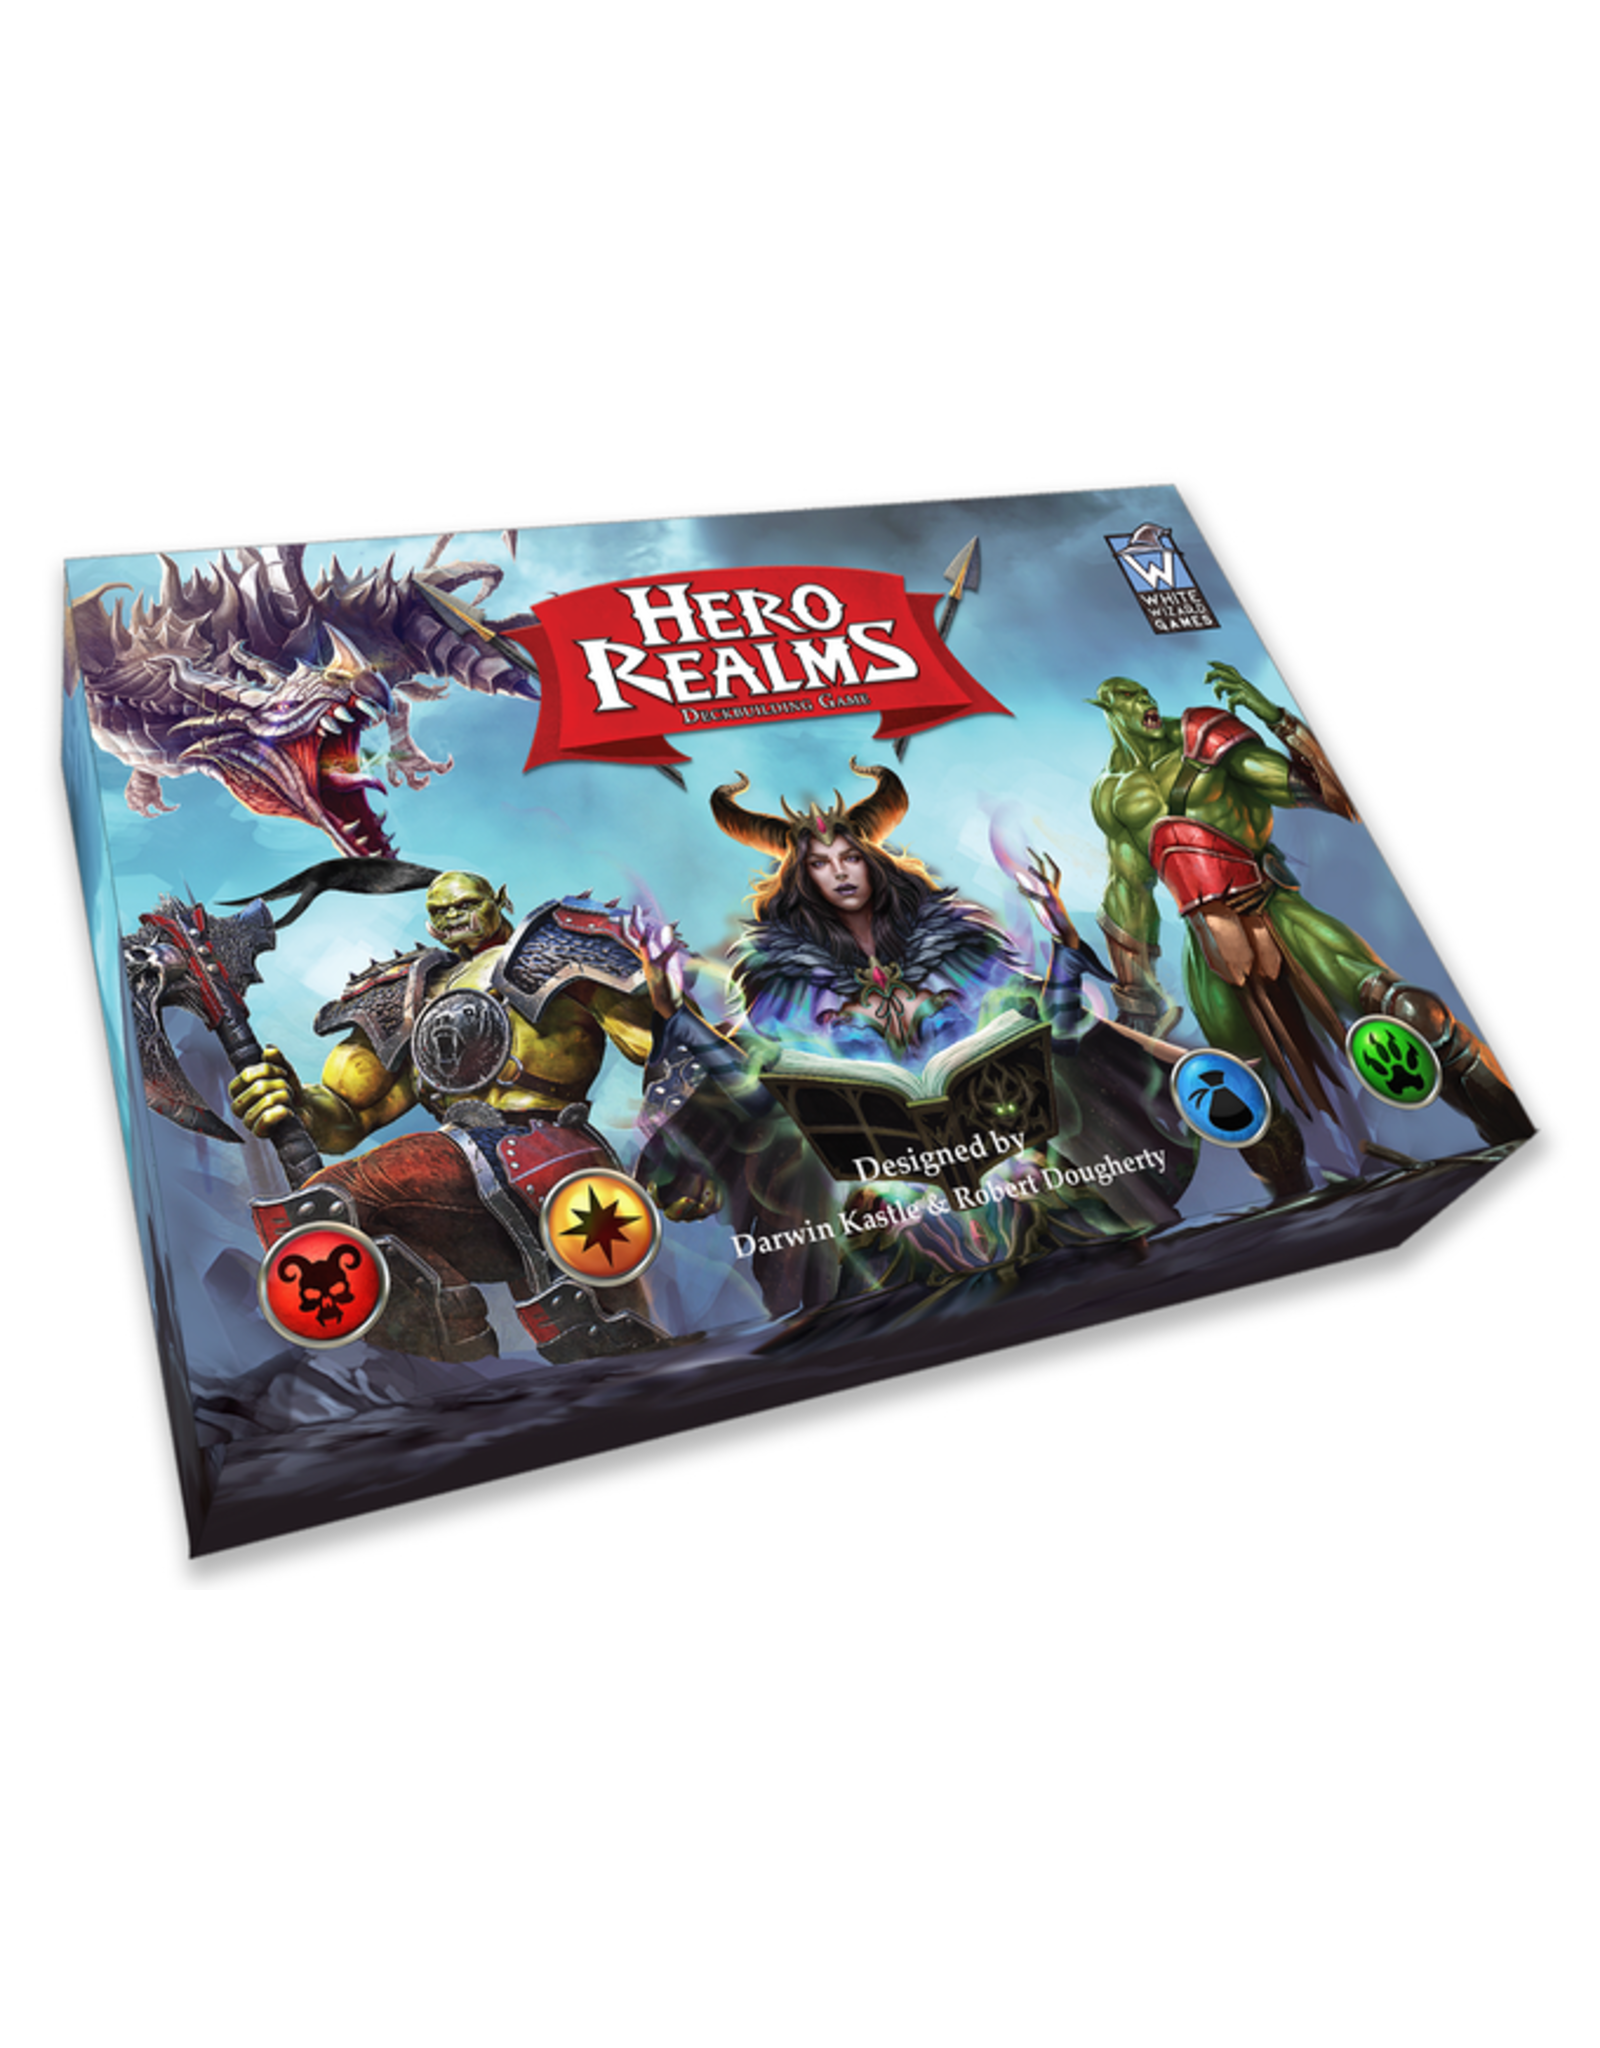 White Wizards Games Hero Realms Deckbuilding Game